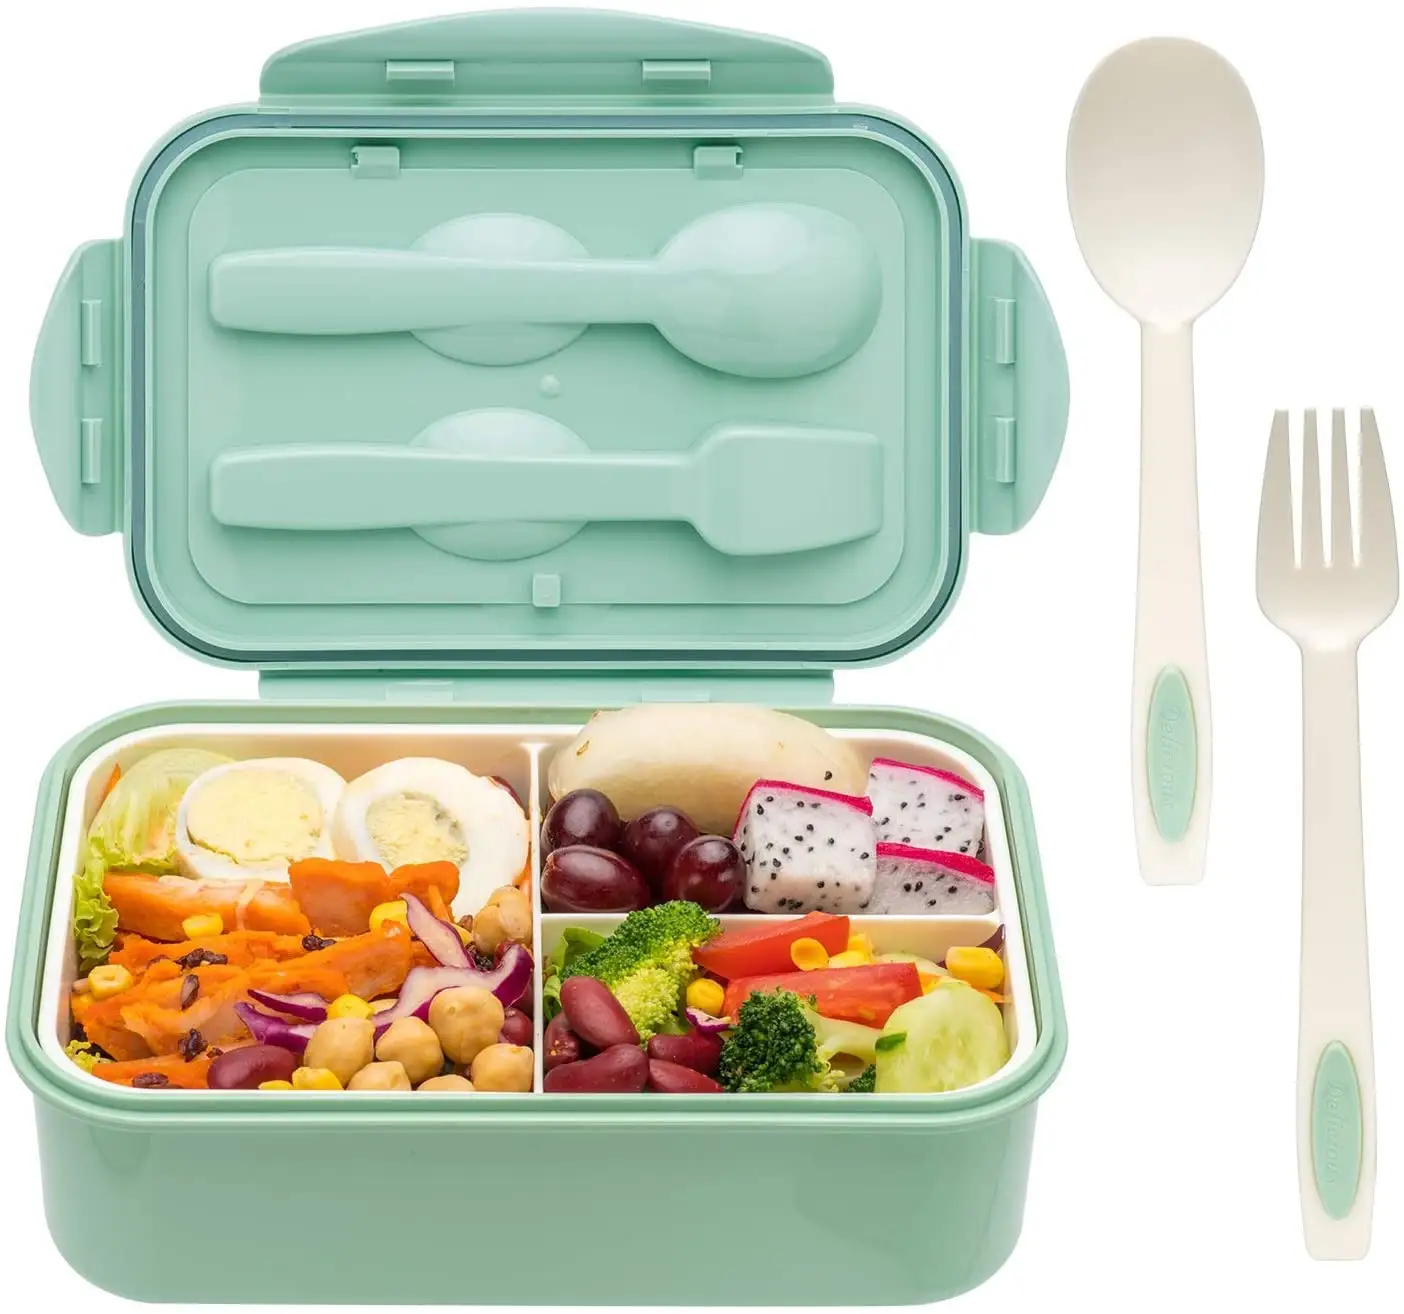 Most Popular 1100 Ml Bento Boxes With Spoon And Fork For Adults Children Food Grade PP Plastic Durable Bento Lunch Box For Kids